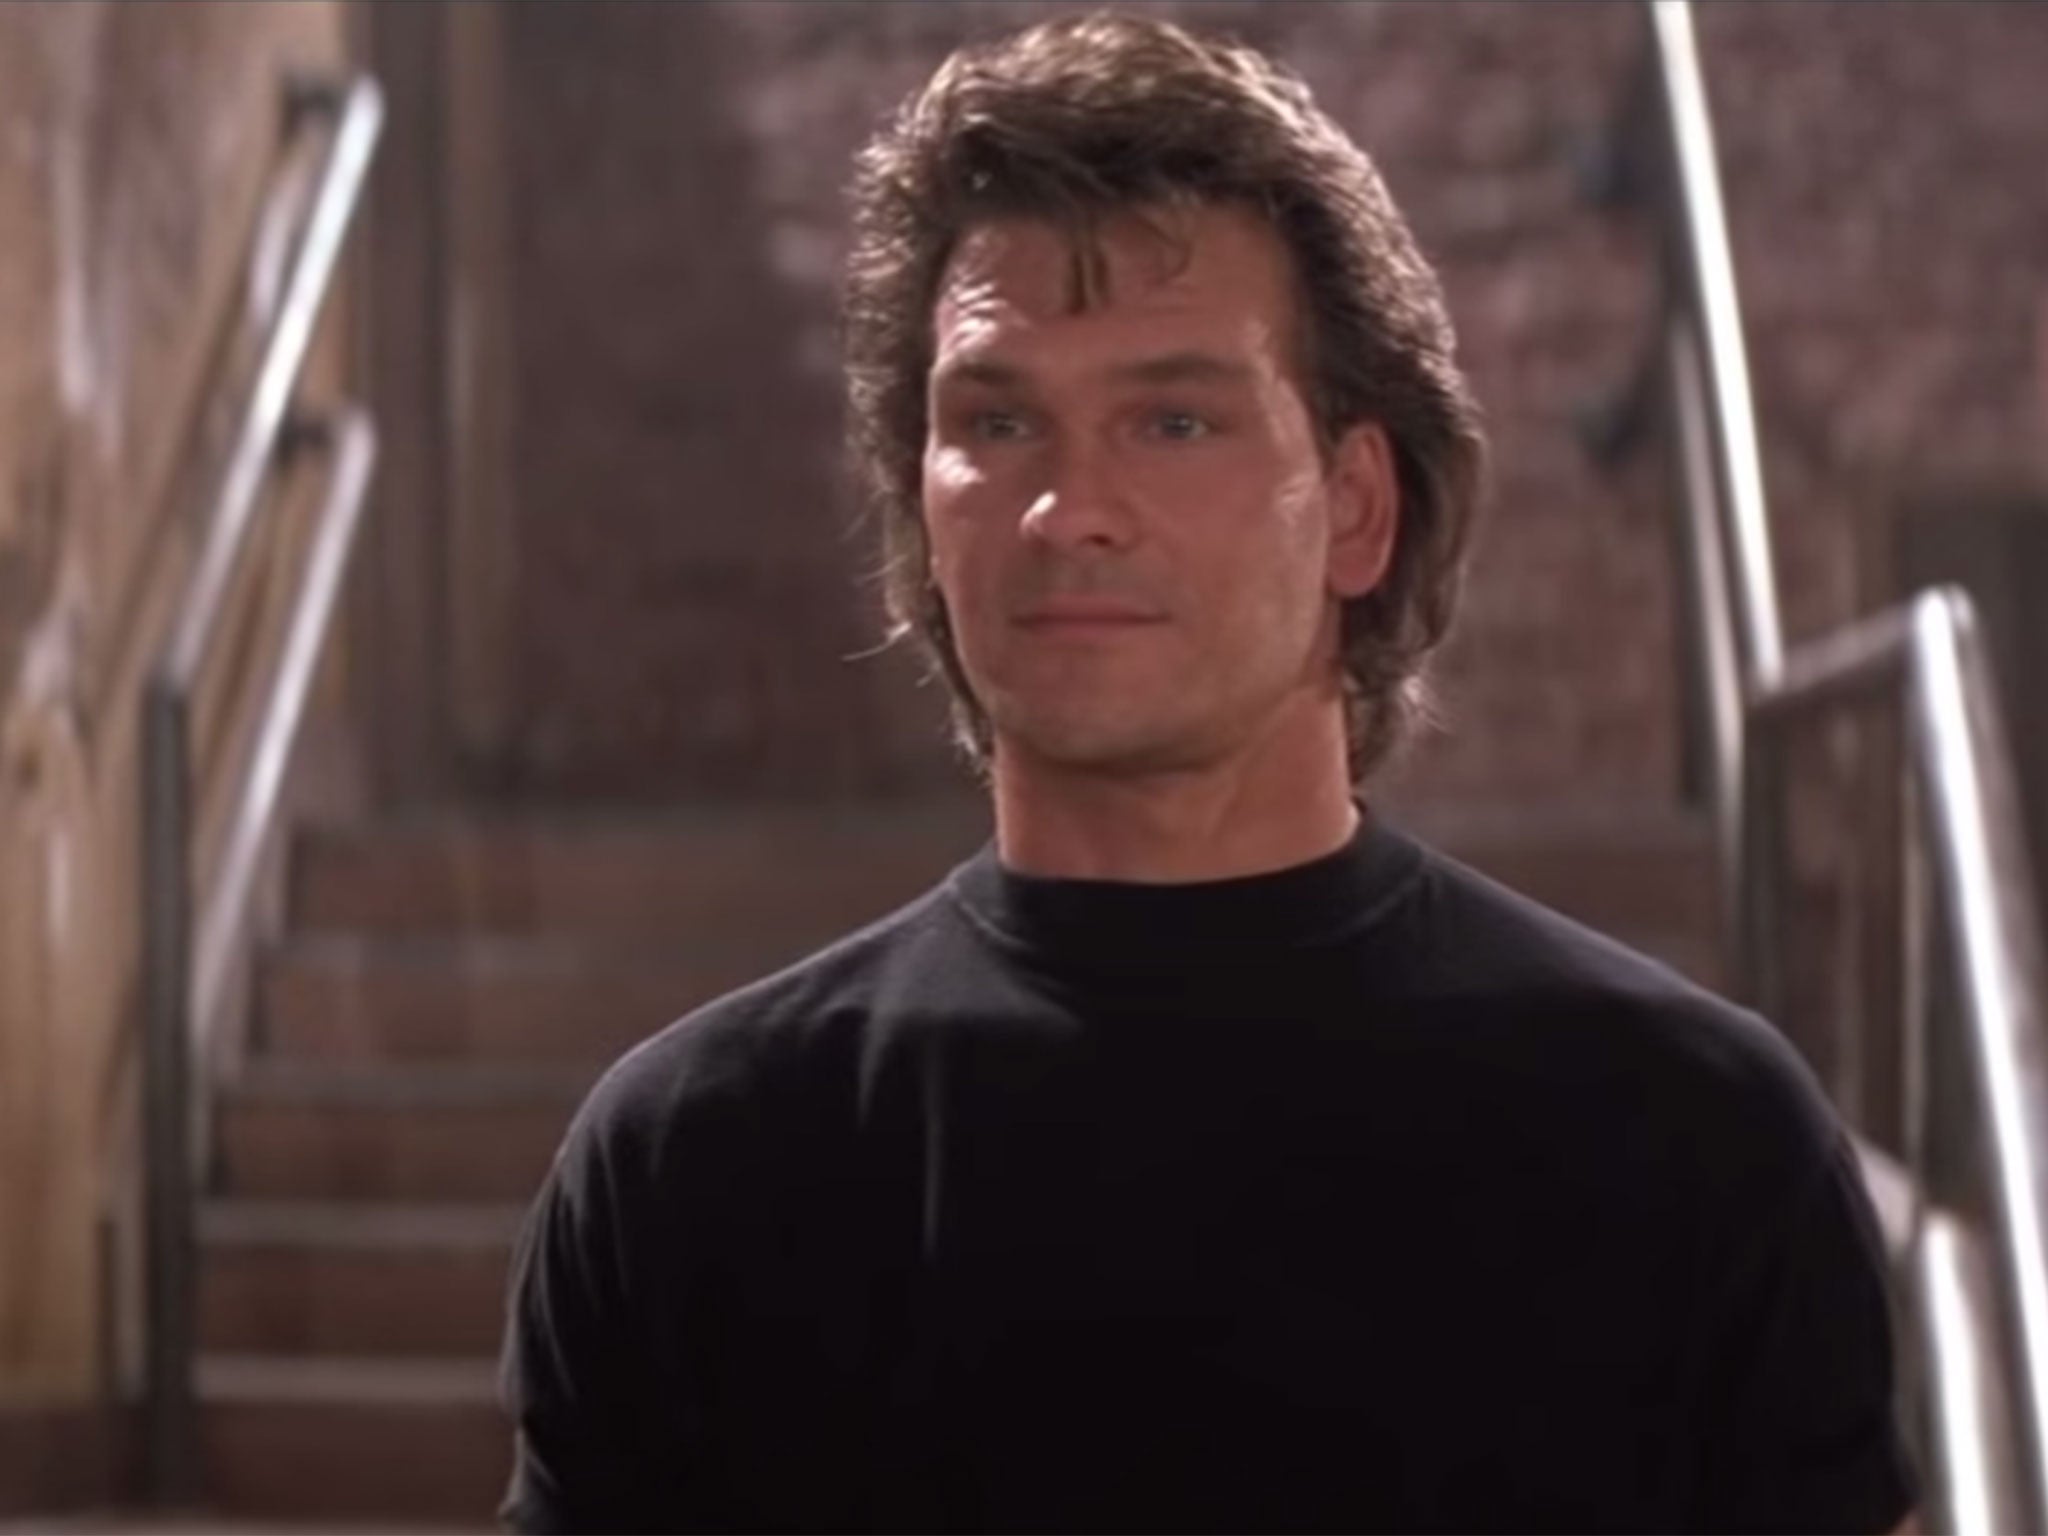 NYPD using Patrick Swayze movie Road House to train police officers